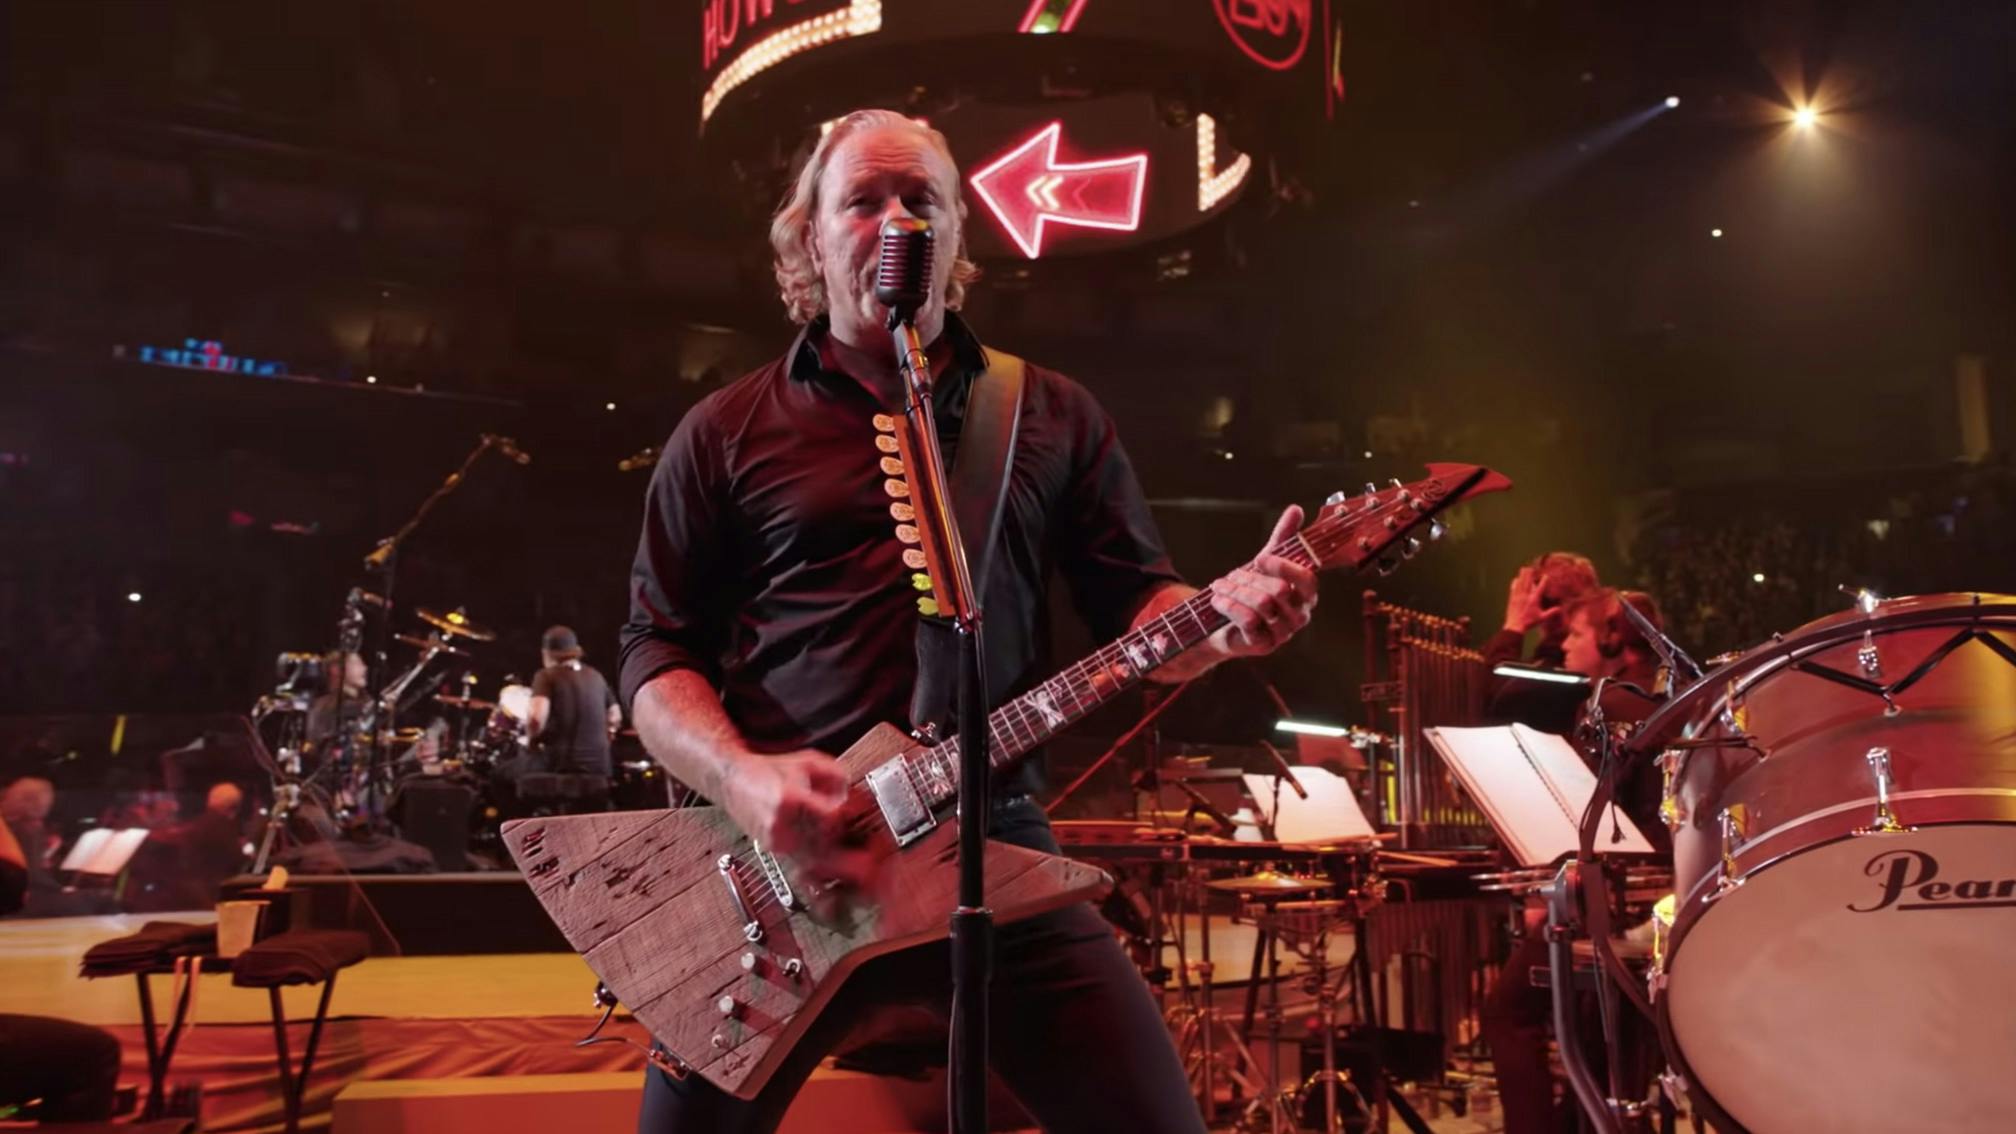 Metallica Share Epic Rendition Of Moth Into Flame From S&M2